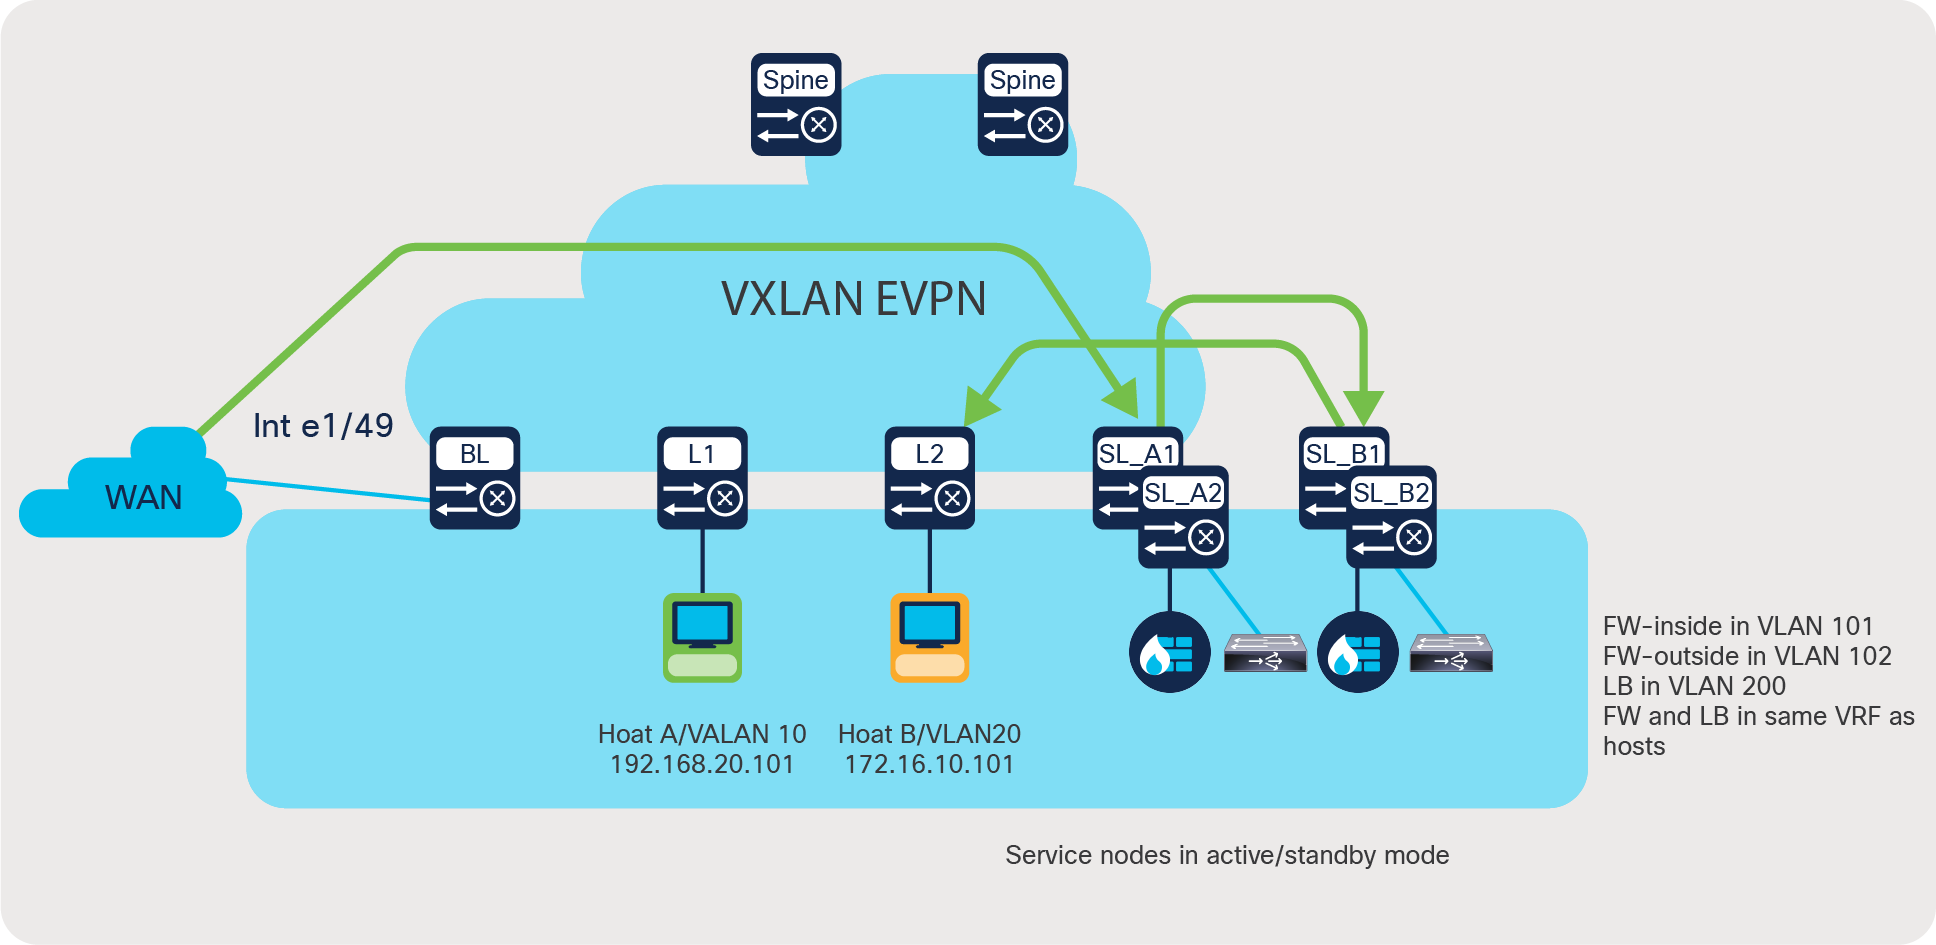 Use case 2: Selective traffic redirection across active/standby service appliances